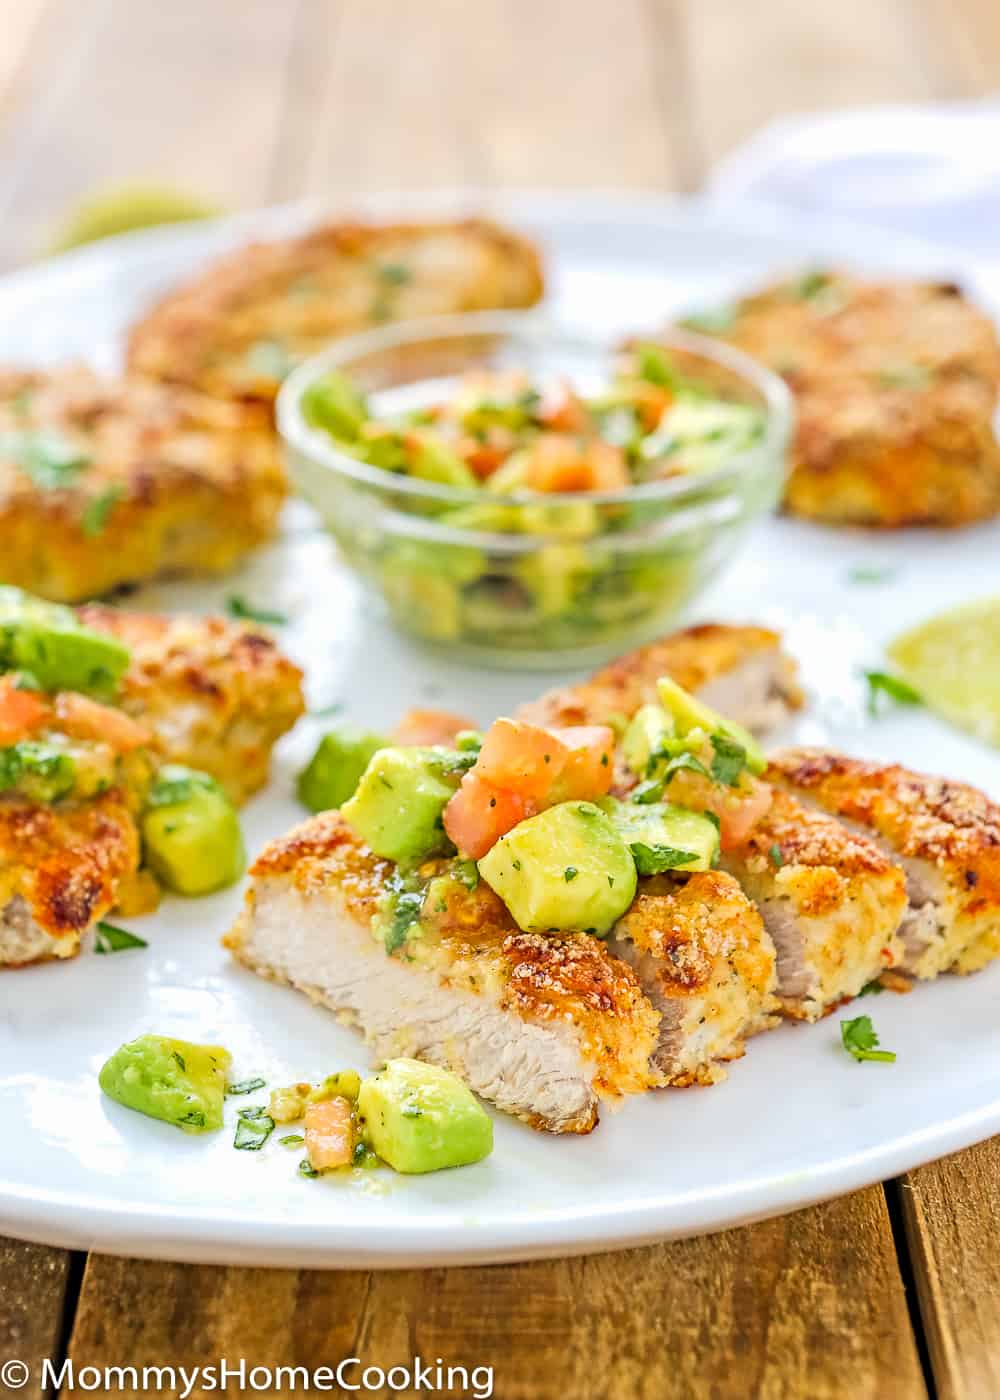 These Low Carb Breadless Skinny Oven Fried Pork Chops are super easy to make and beyond flavorful. It comes together in about 30 minutes, making it a great, and healthy, weeknight dinner. https://mommyshomecooking.com